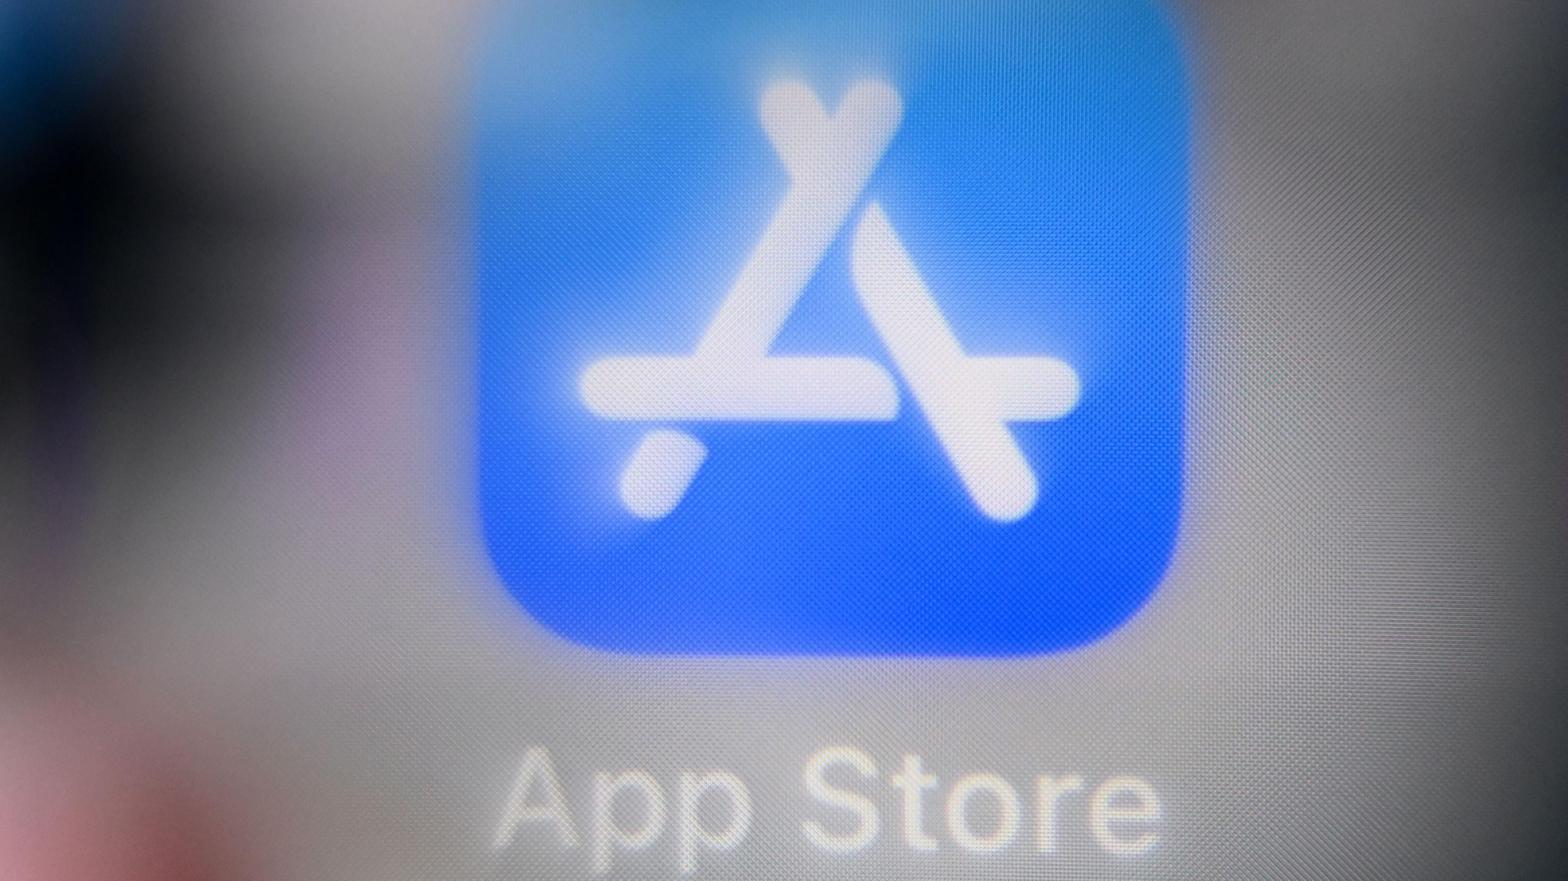 The new app store policy requires users to opt-out of price hikes. (Image: Kirill Kudryavtsev, Getty Images)